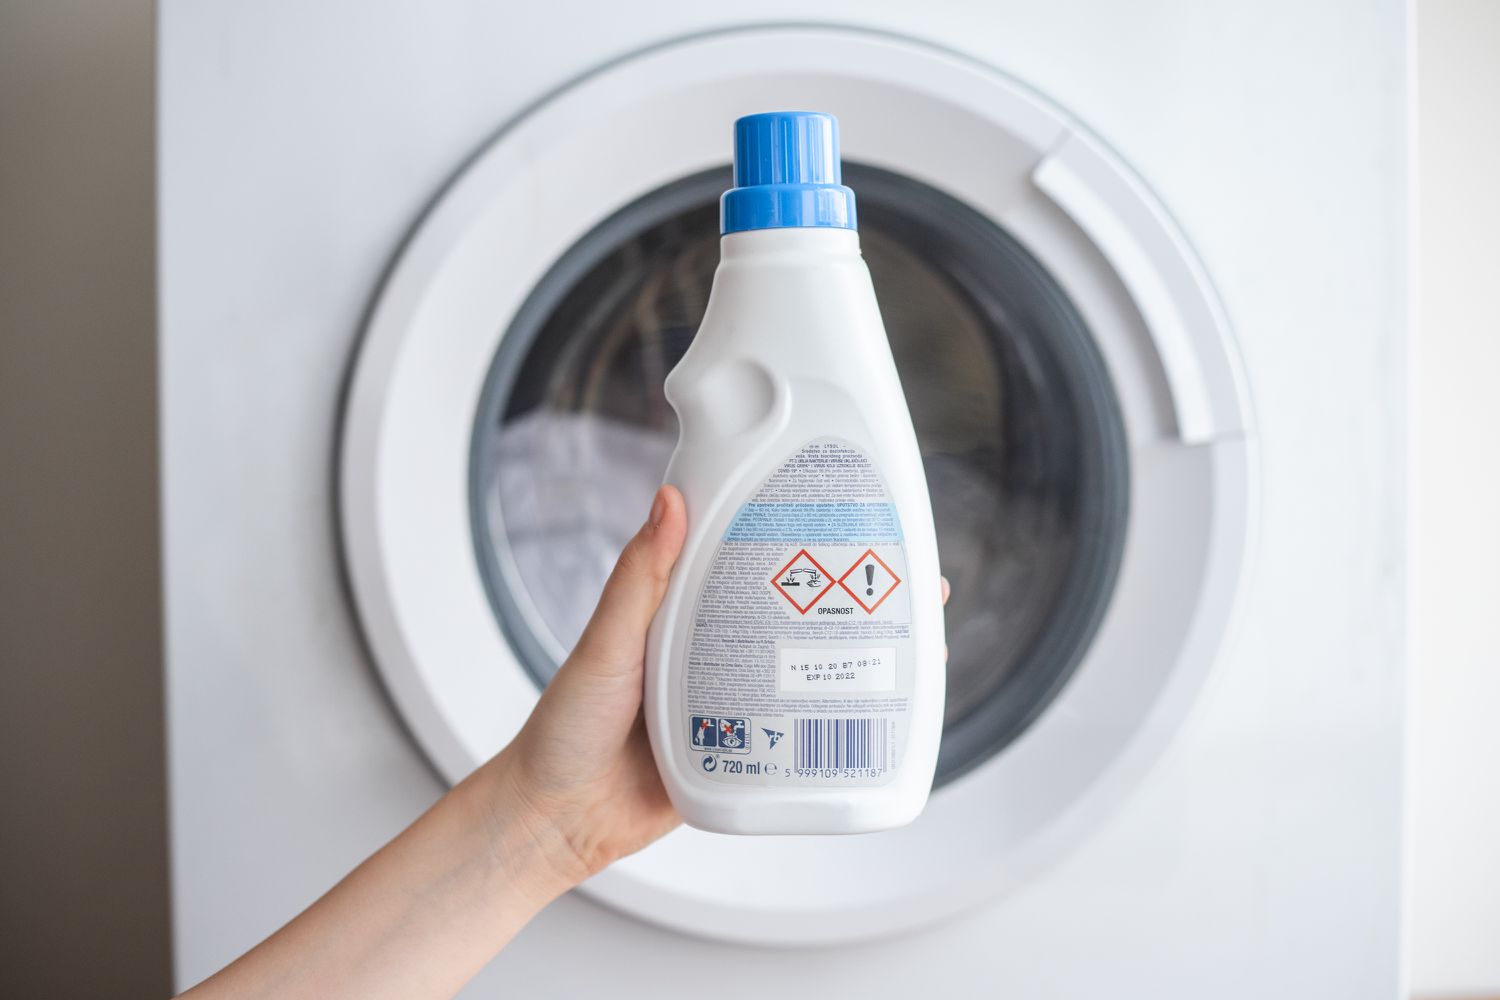 Heavy duty detergent with enzymes held up in front of washing machine